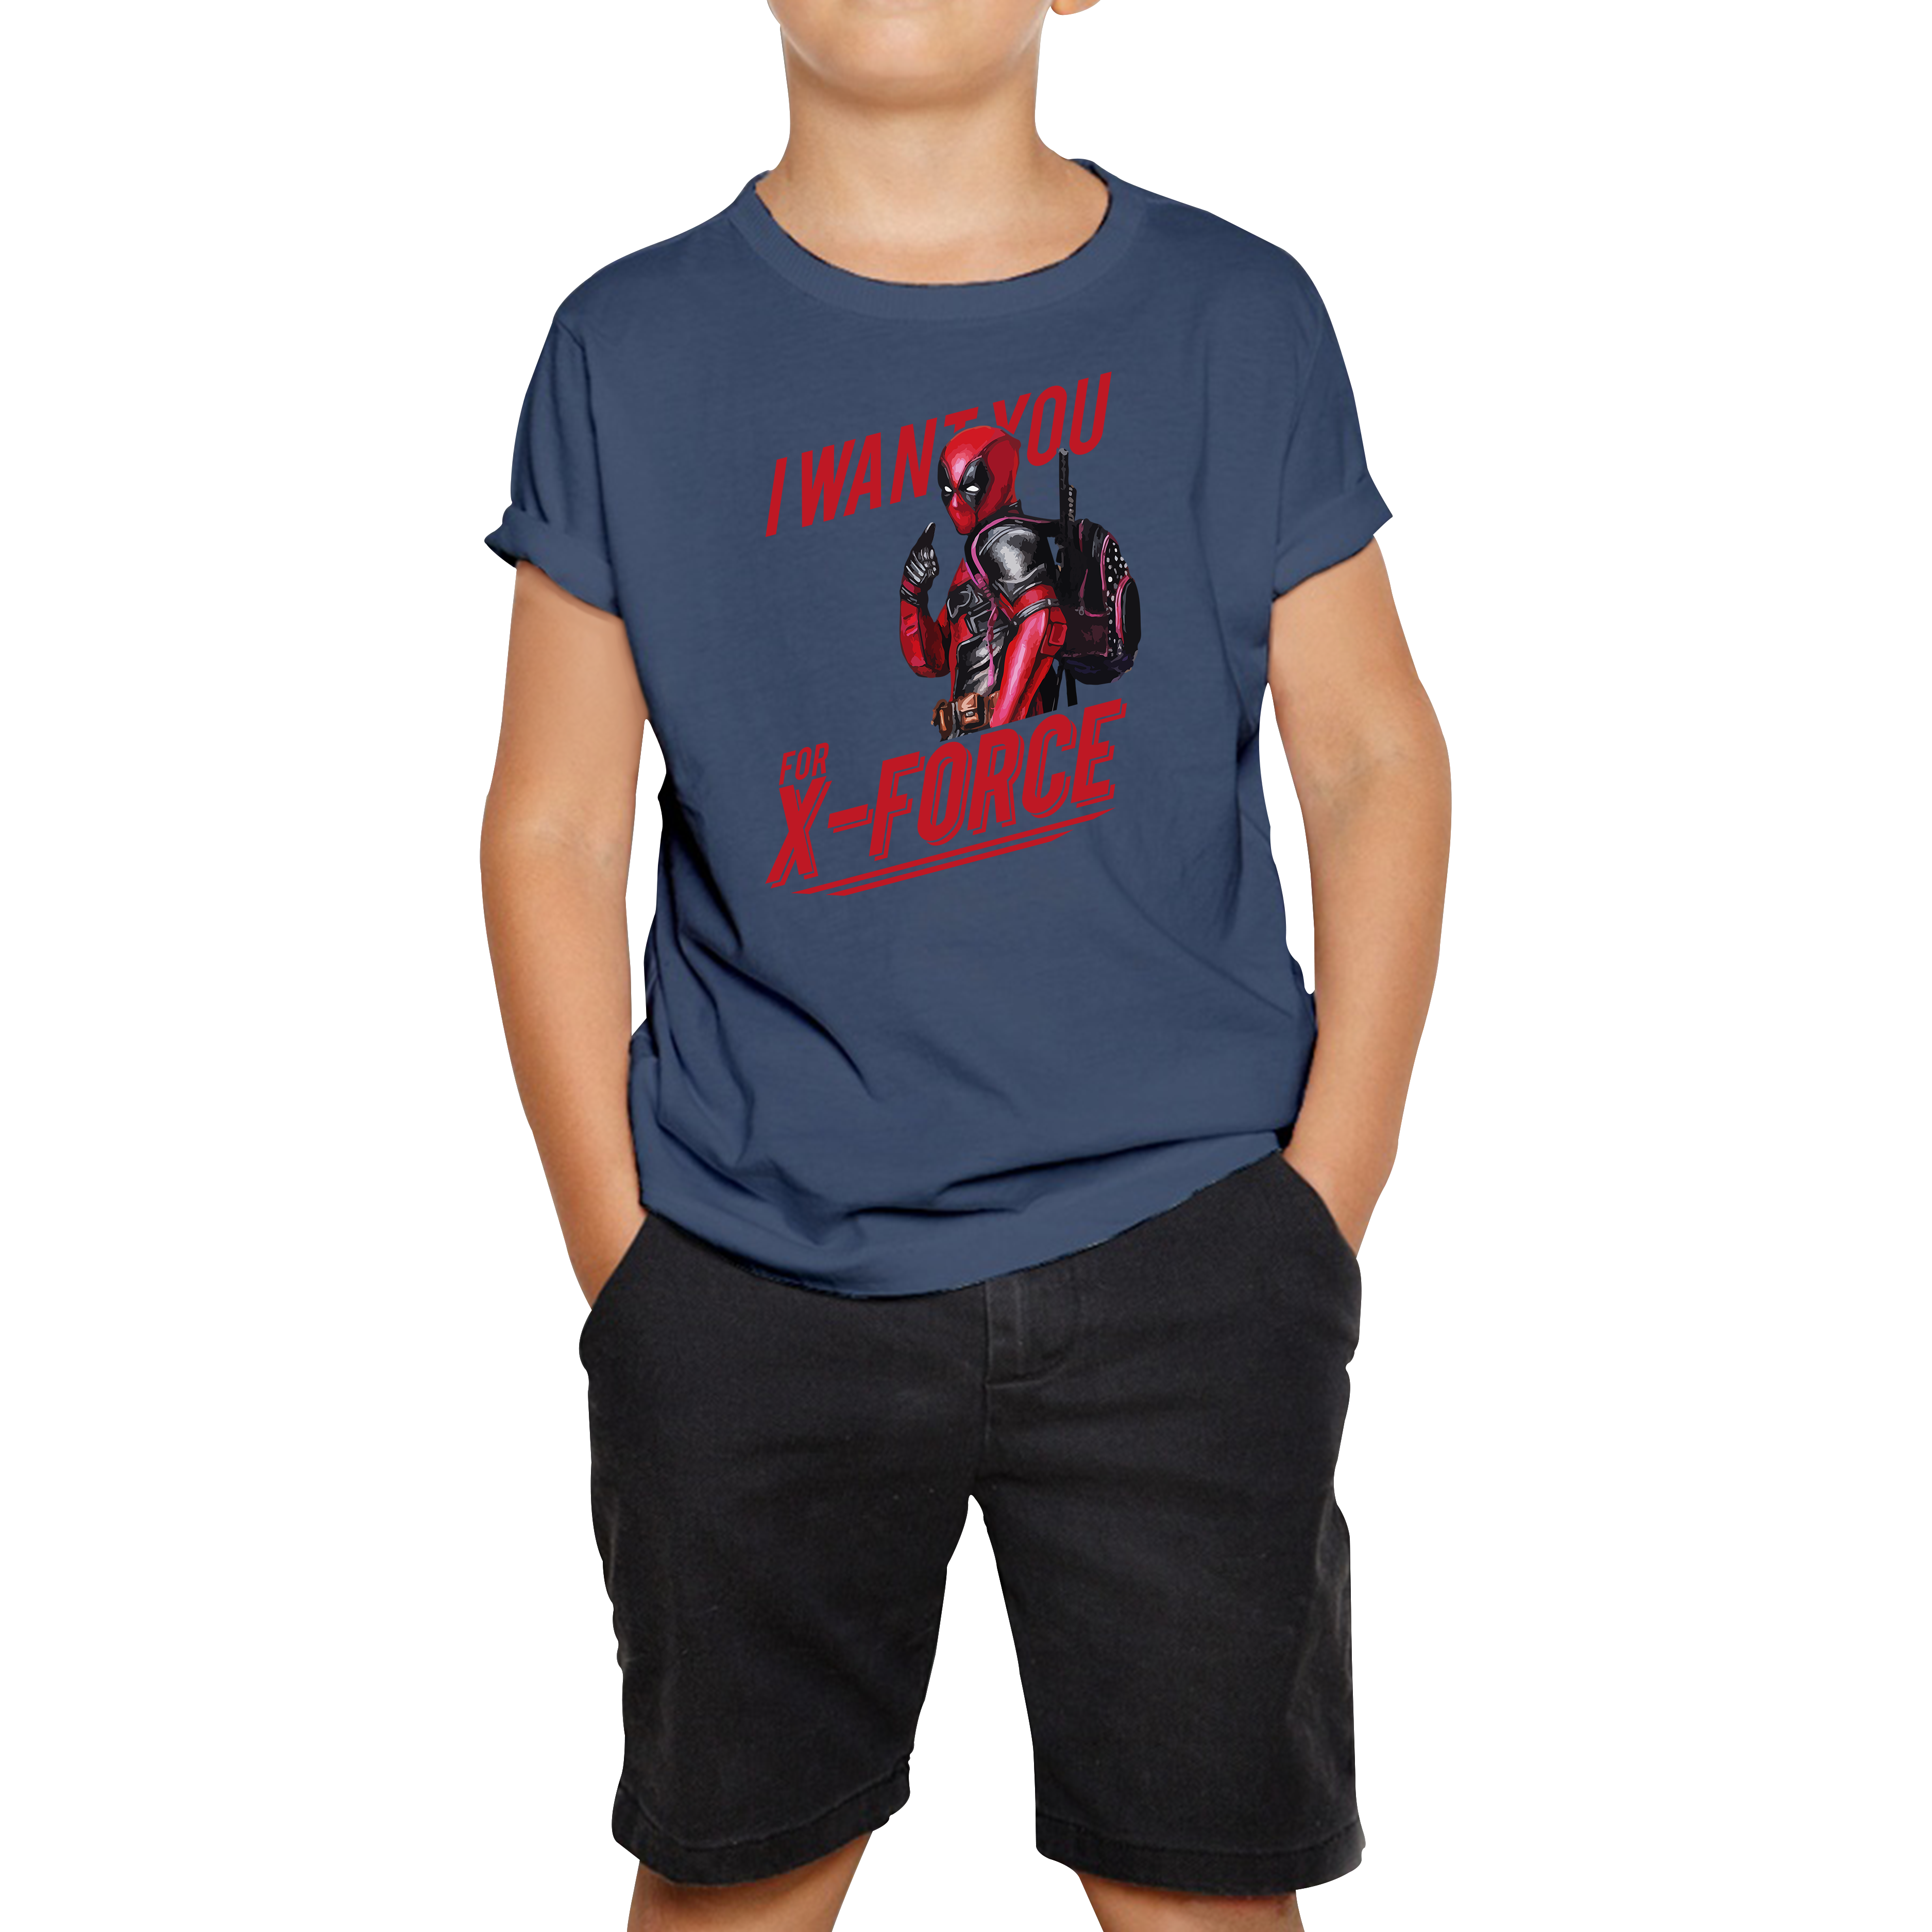 I Want You For X-Force, Deadpool Inspired Kids T Shirt